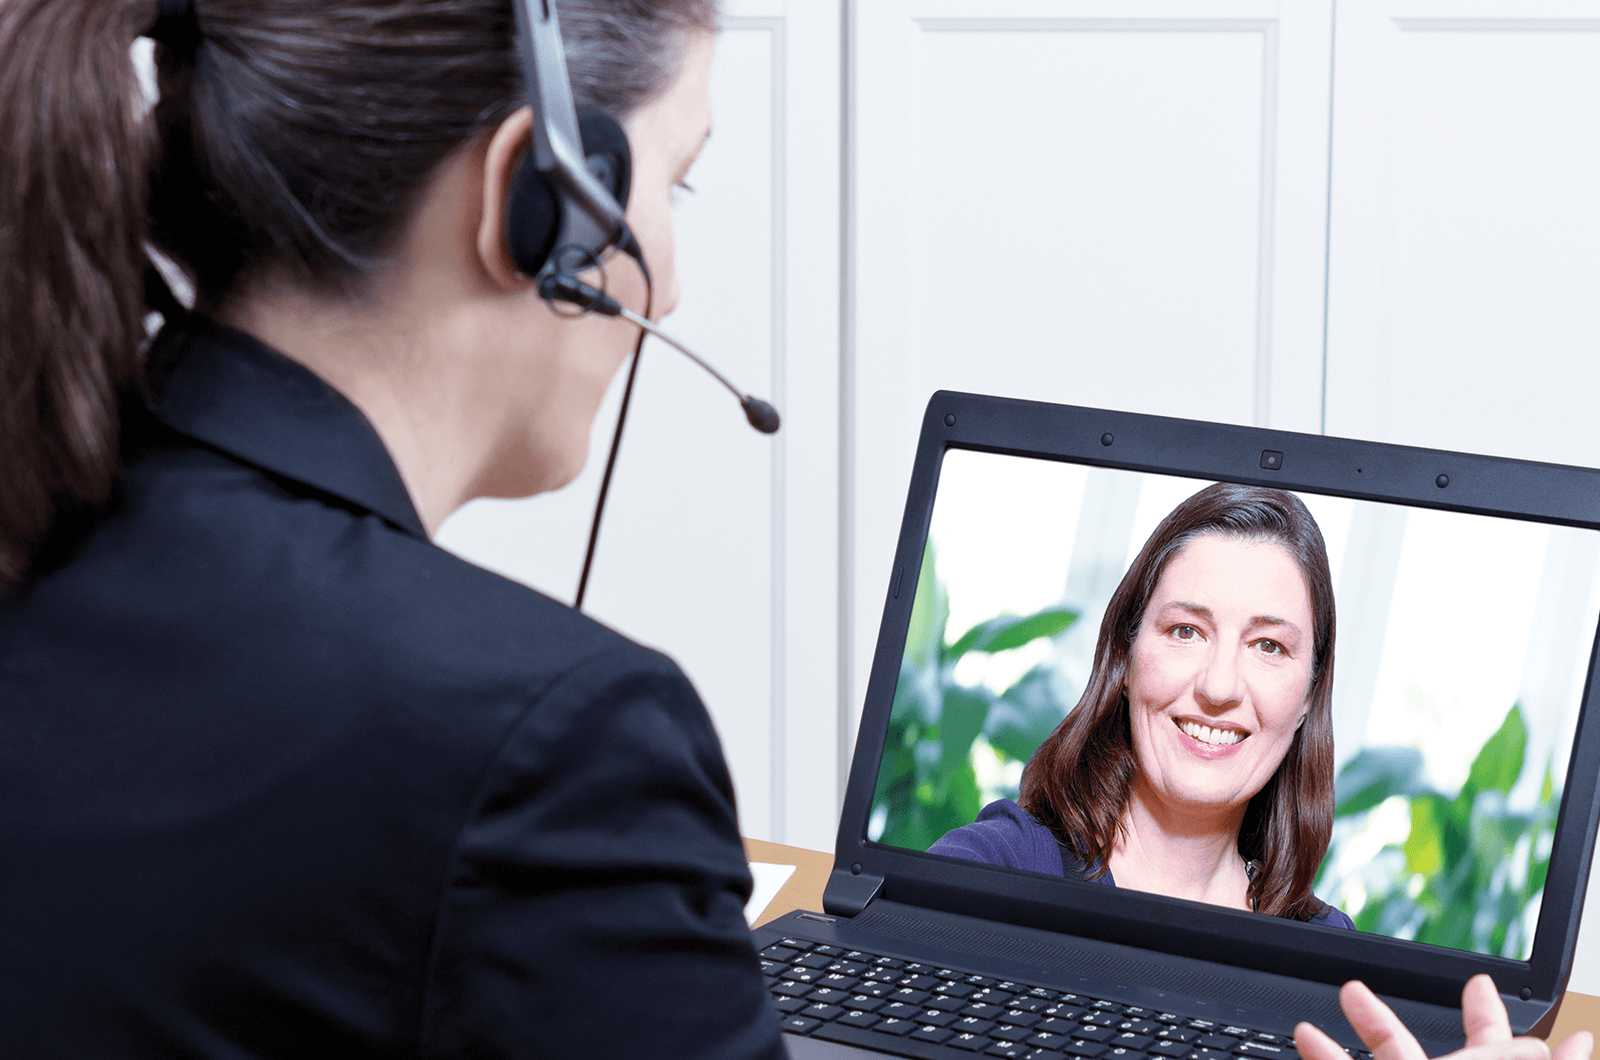 Woman wearing headset interviewing with another woman on laptop